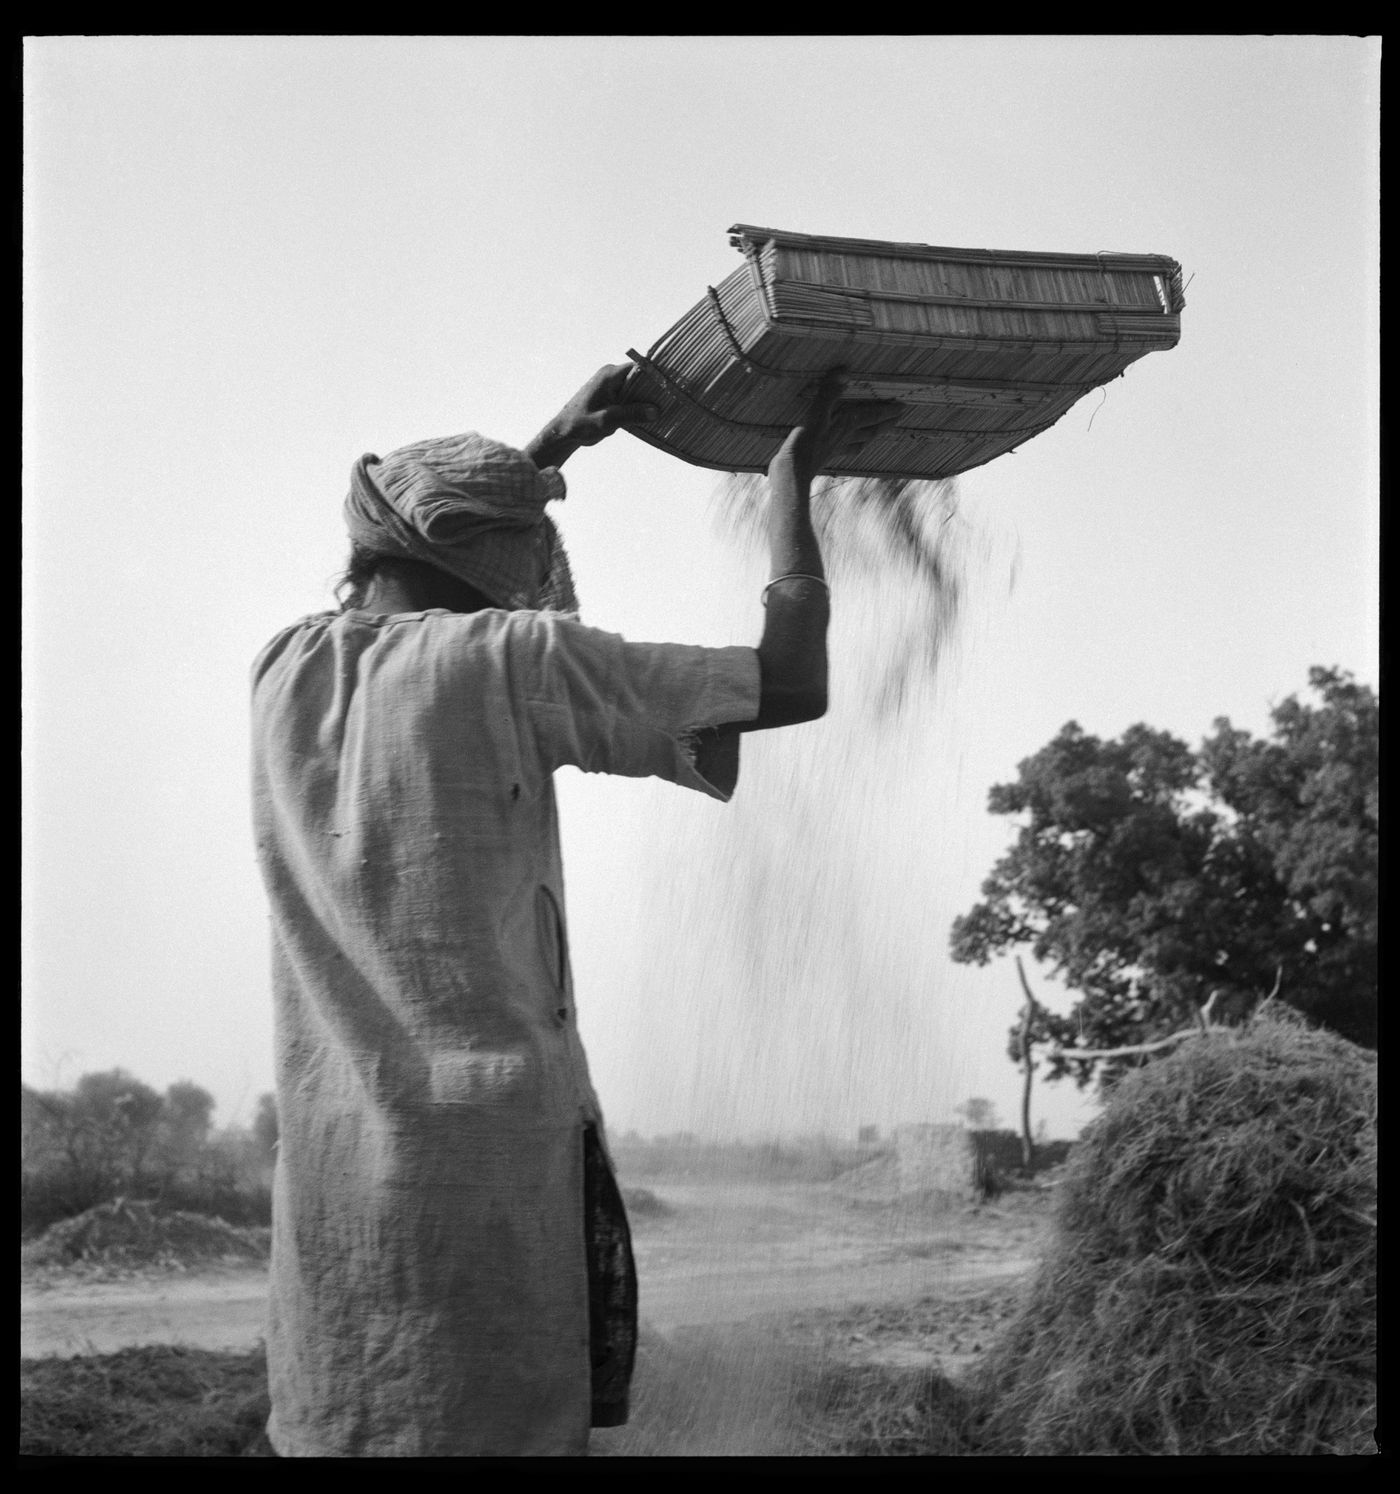 View of man sifting sand in Chandigarhès area before the construction, India